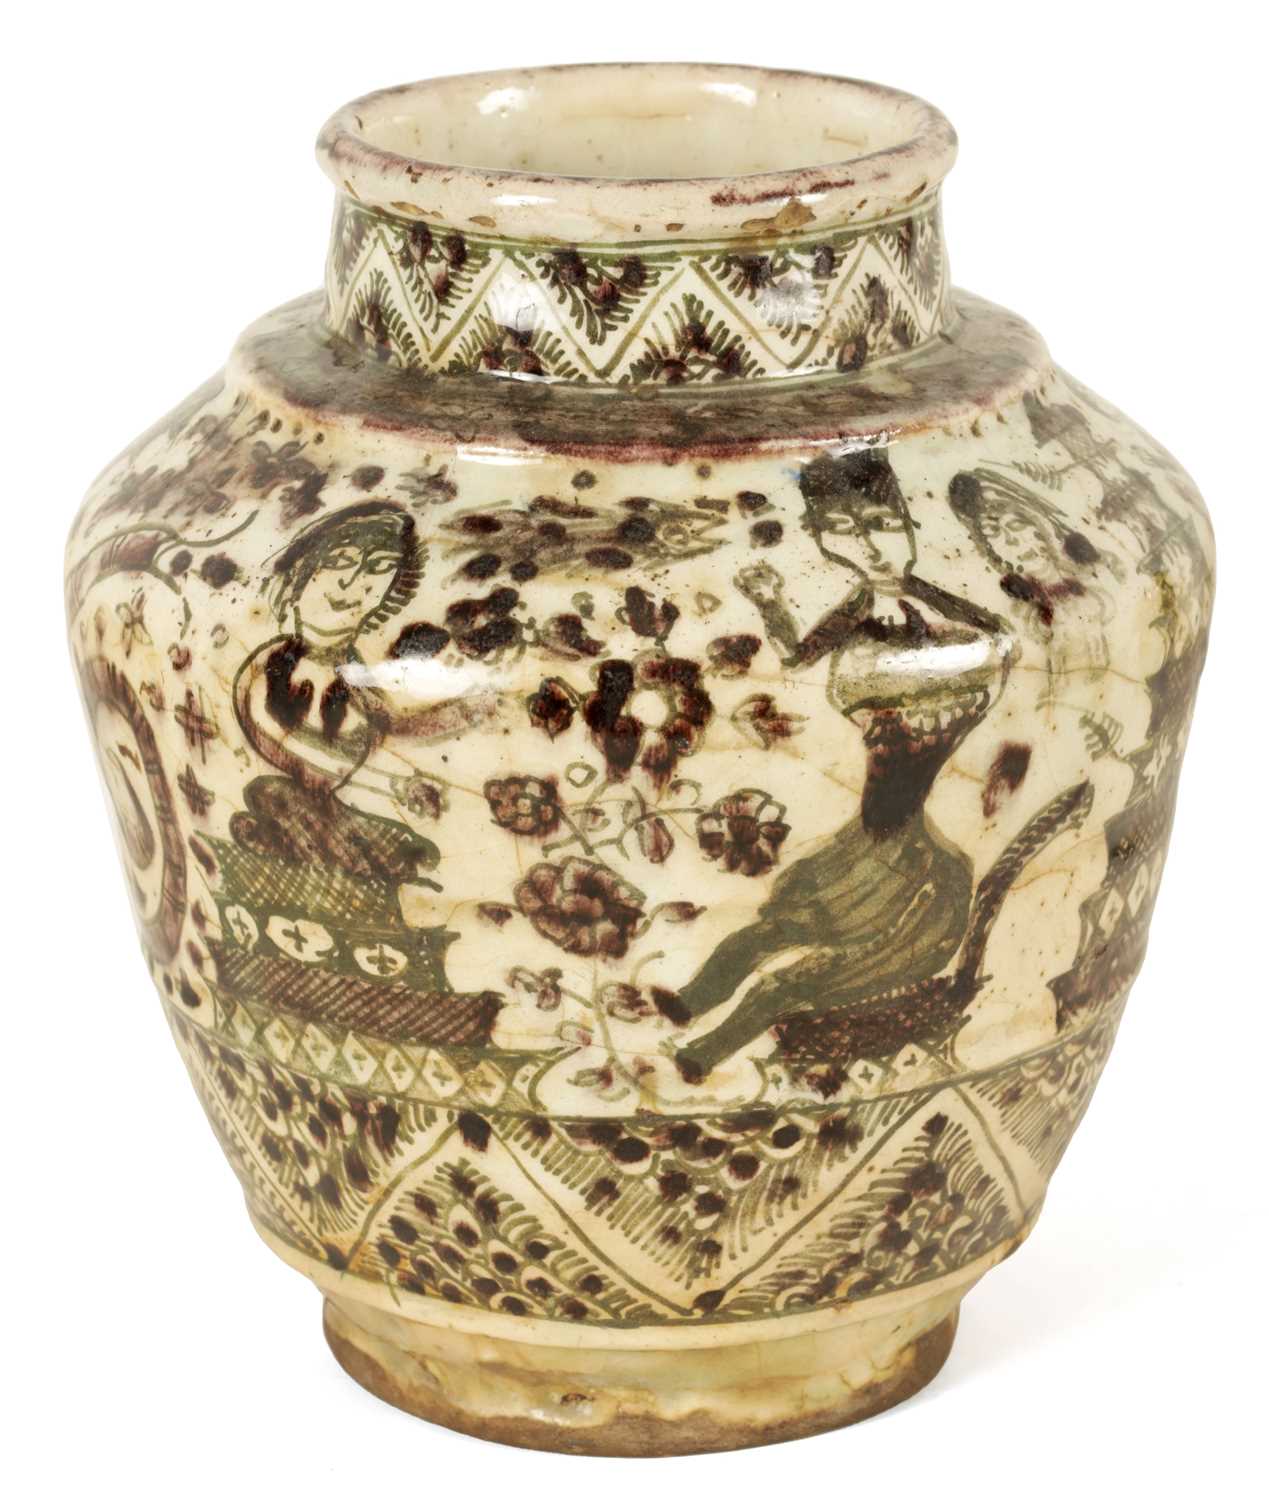 Lot 110 - AN EARLY PERSIAN GLAZED EARTHENWARE SHOULDERED VASE